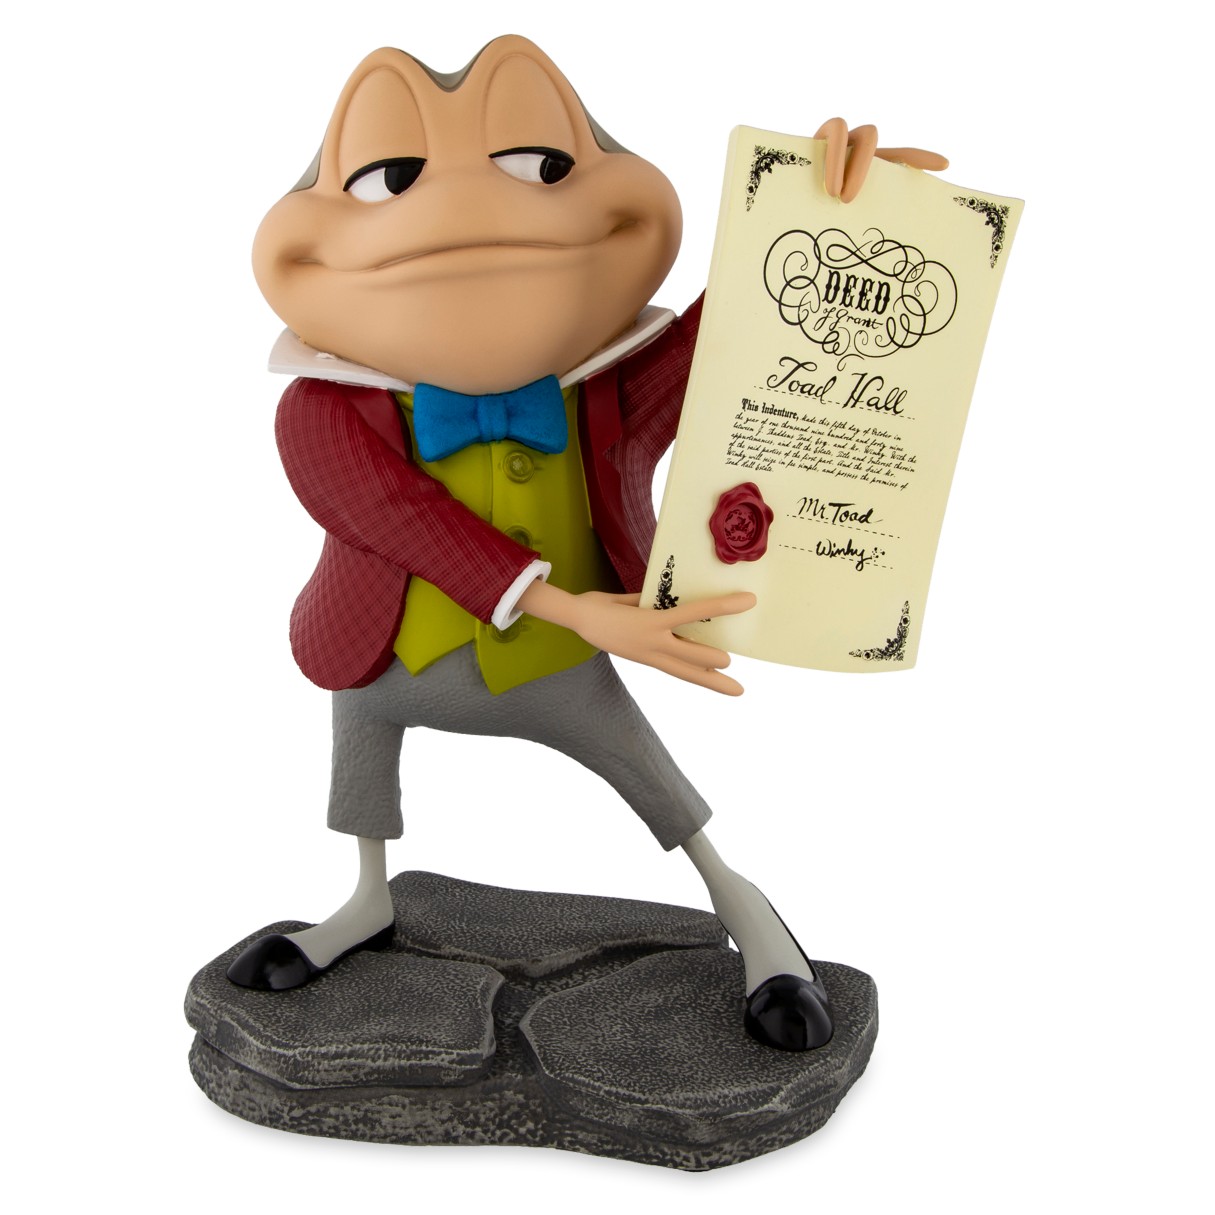 J. Thaddeus Toad Figure – The Adventures of Ichabod and Mr. Toad